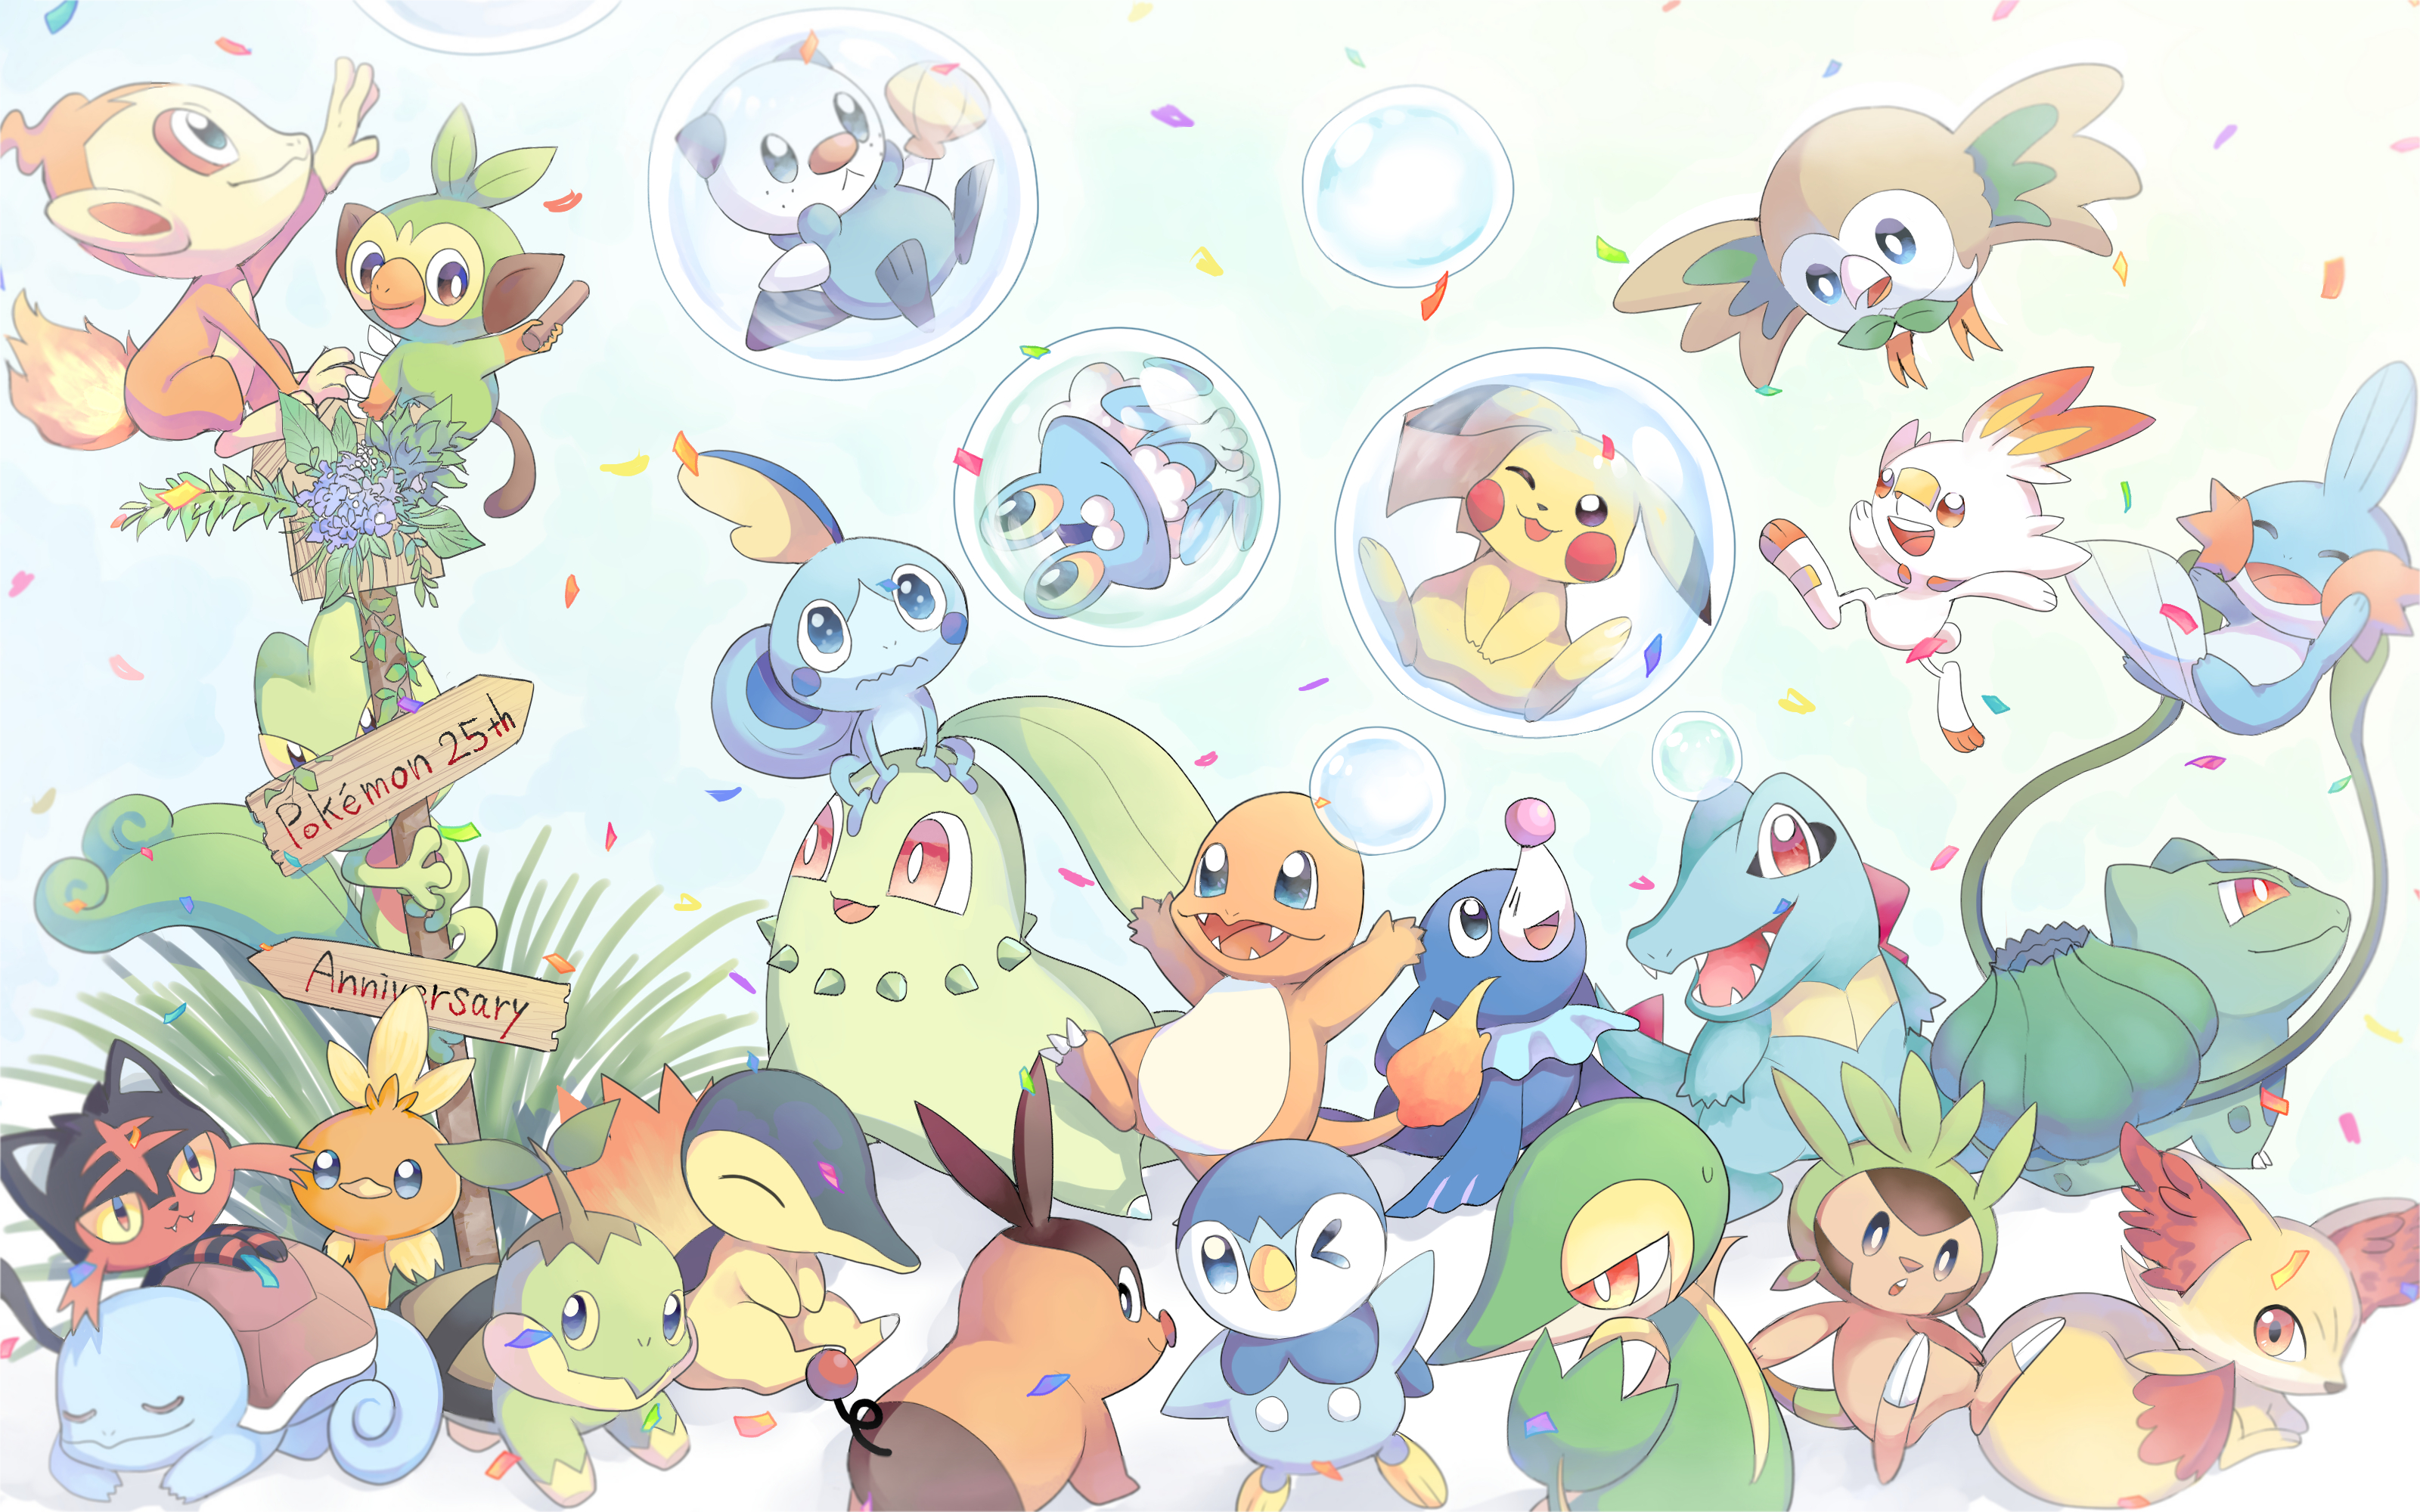 Piplup and Torchic